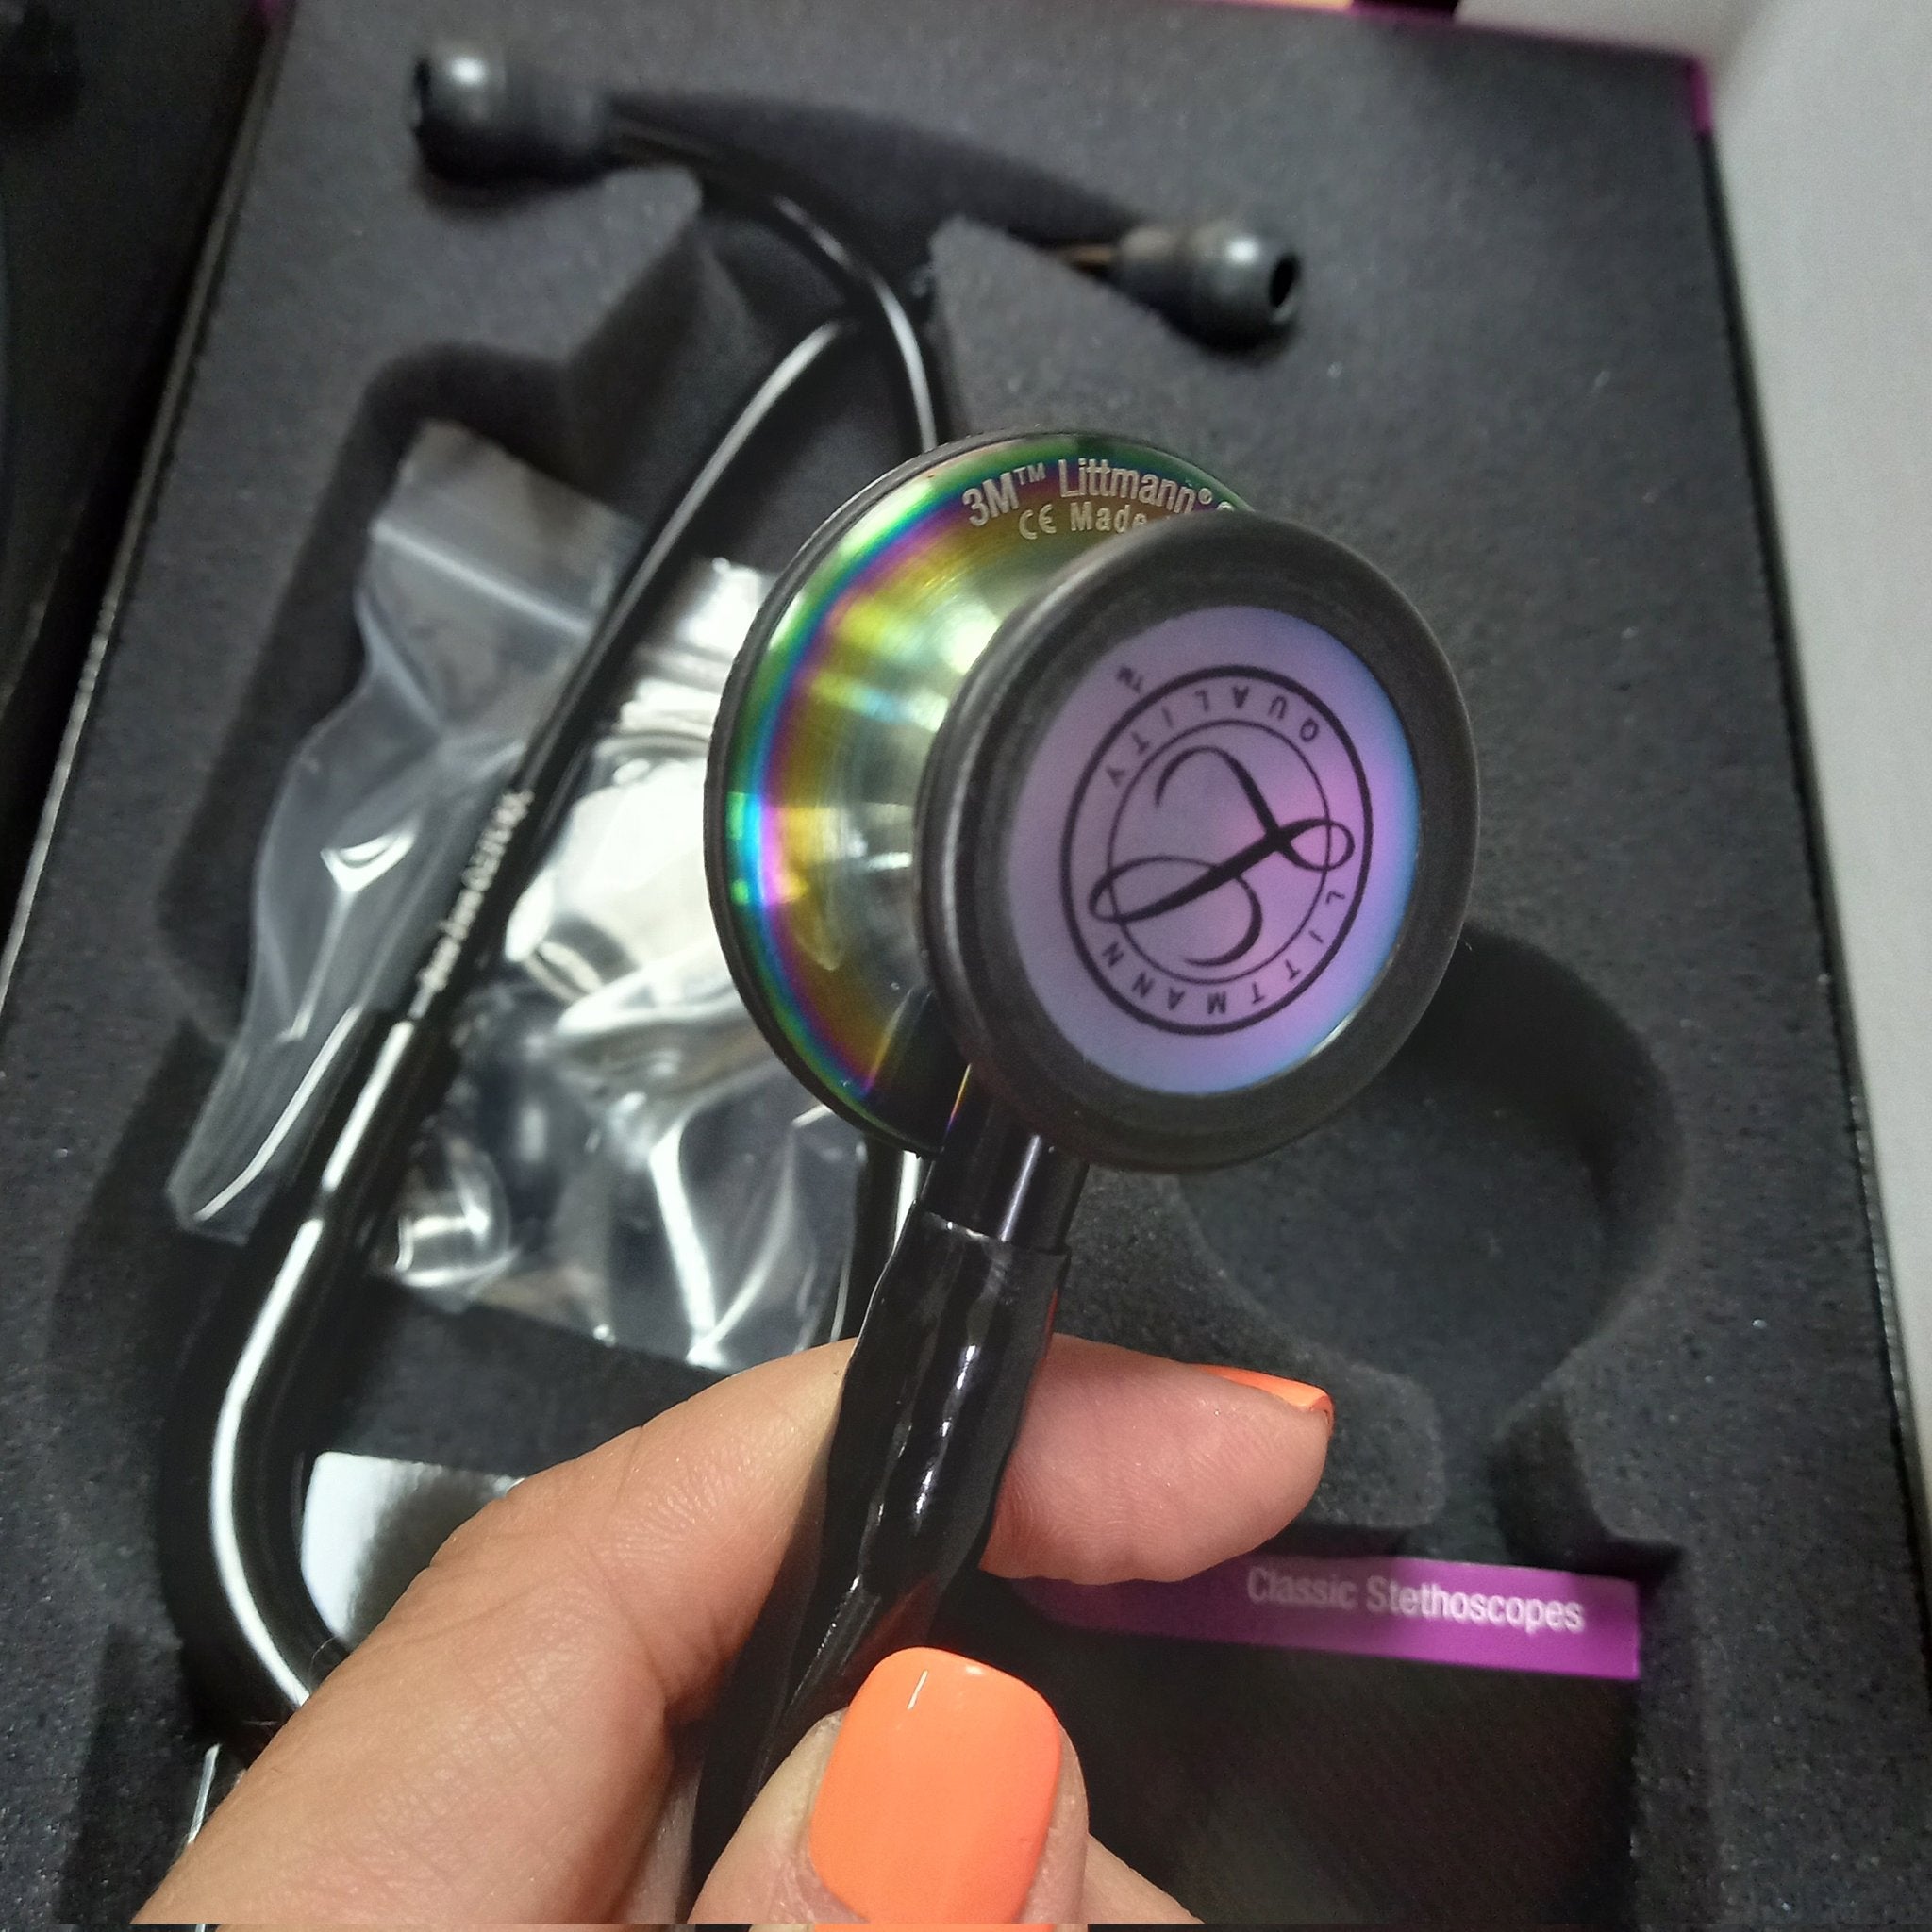 3M Littmann Classic III Stethoscope Special Black with Black and Rainbow Finish (5870) - 3M Littmann Classic III Special Edition Supplier in Pakistan - 3M Littmann Classic III 5870 Black with Rainbow Stethoscopes in Pakistan